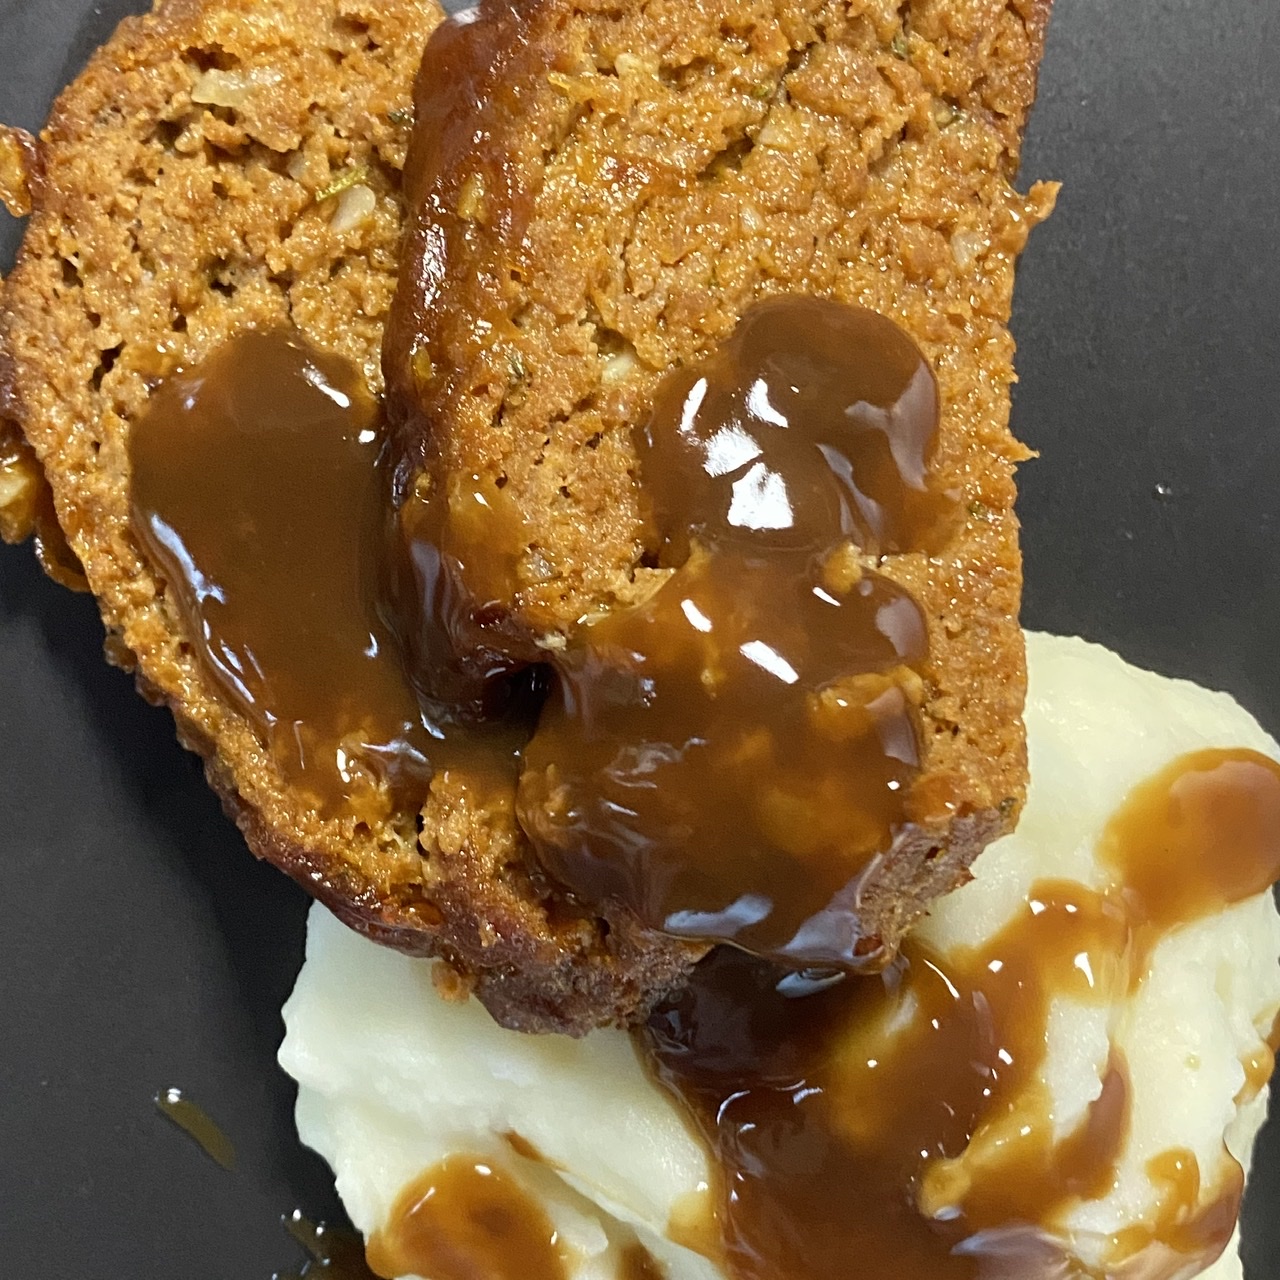 E0D44721 84C0 464D 83D5 832B143EDBBB - Grown-up Meatloaf with a Savory Whiskey Glaze